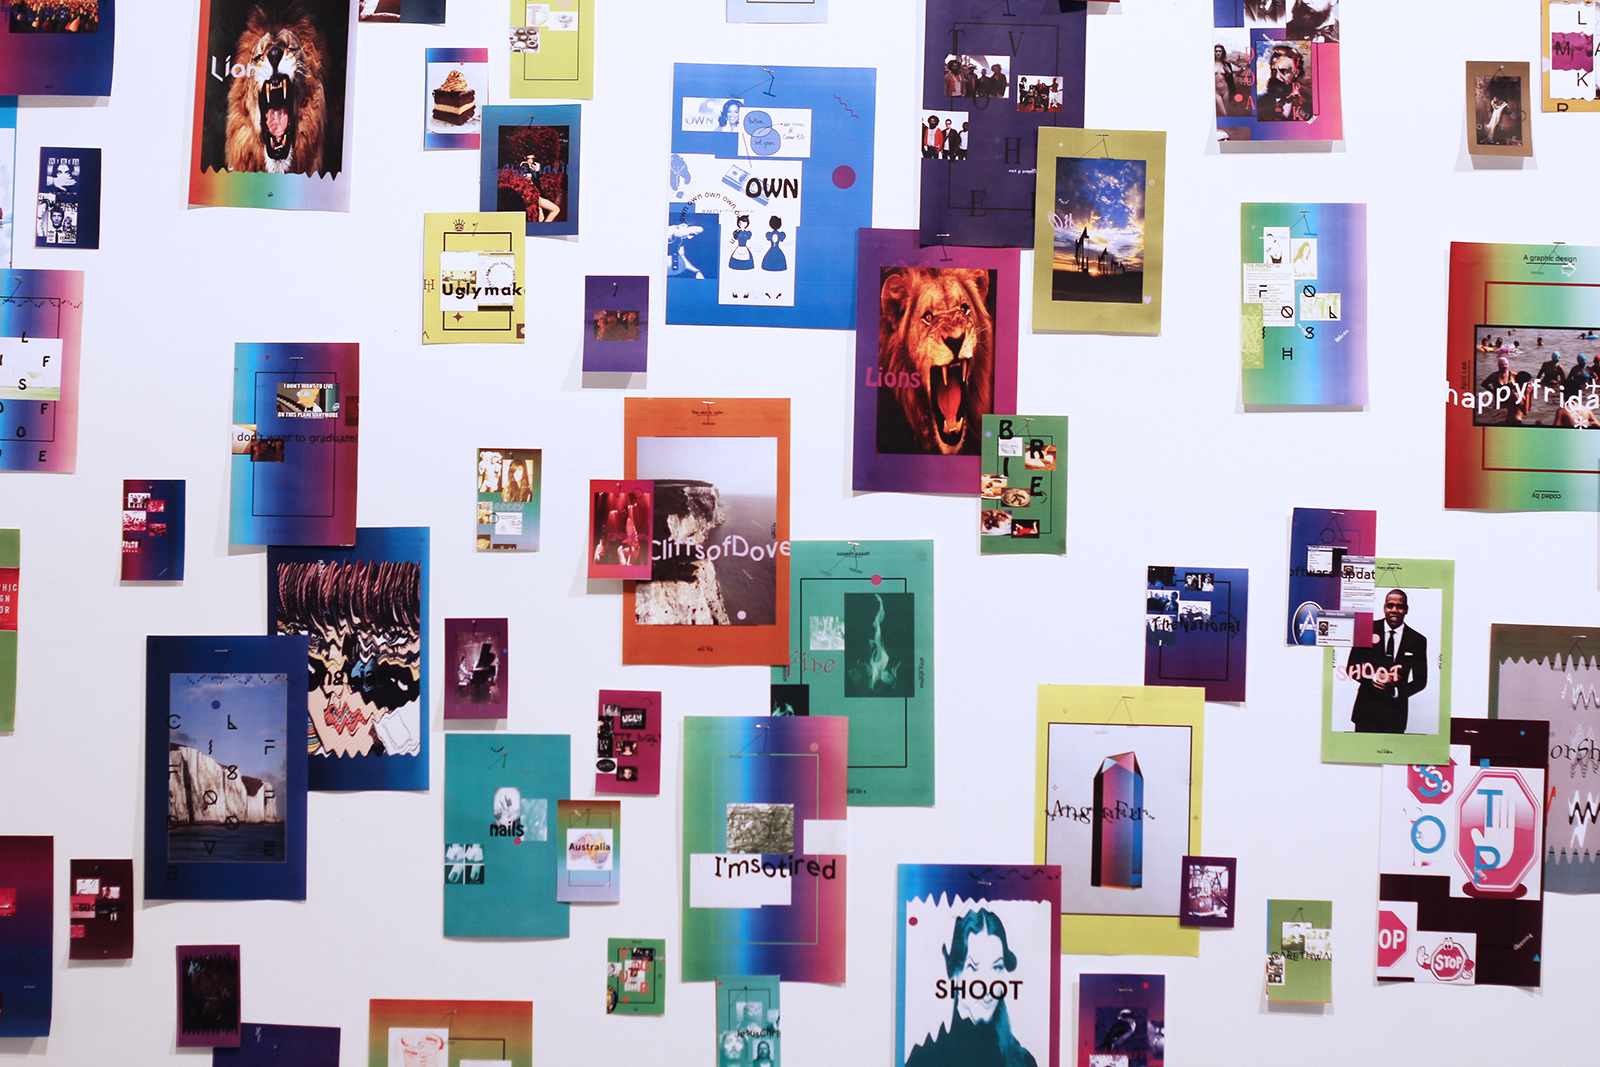 A close-up of the wall of tiny colorful generated posters in the style popular around 2012. Hobo and Apercu are prominent fonts. Frames, overlapping rectangles, text distributed along the edges of the posters, wavy text and graphics, and gradients are other visible elements.